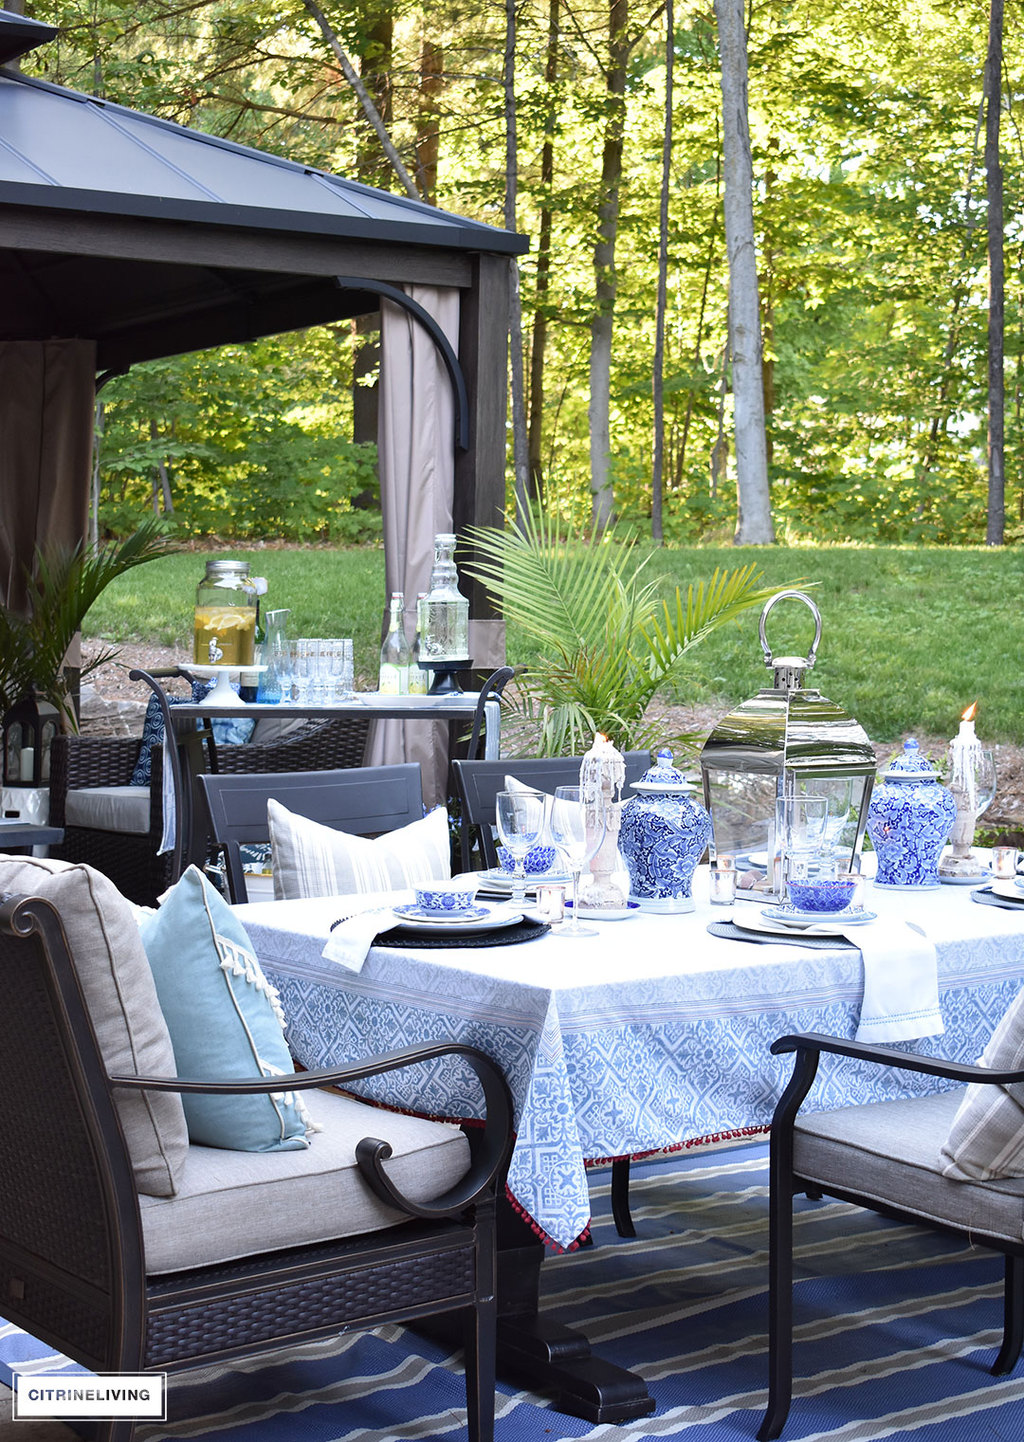 Layers of blue and white mixed with pattern and texture is a key element in this outdoor setting.